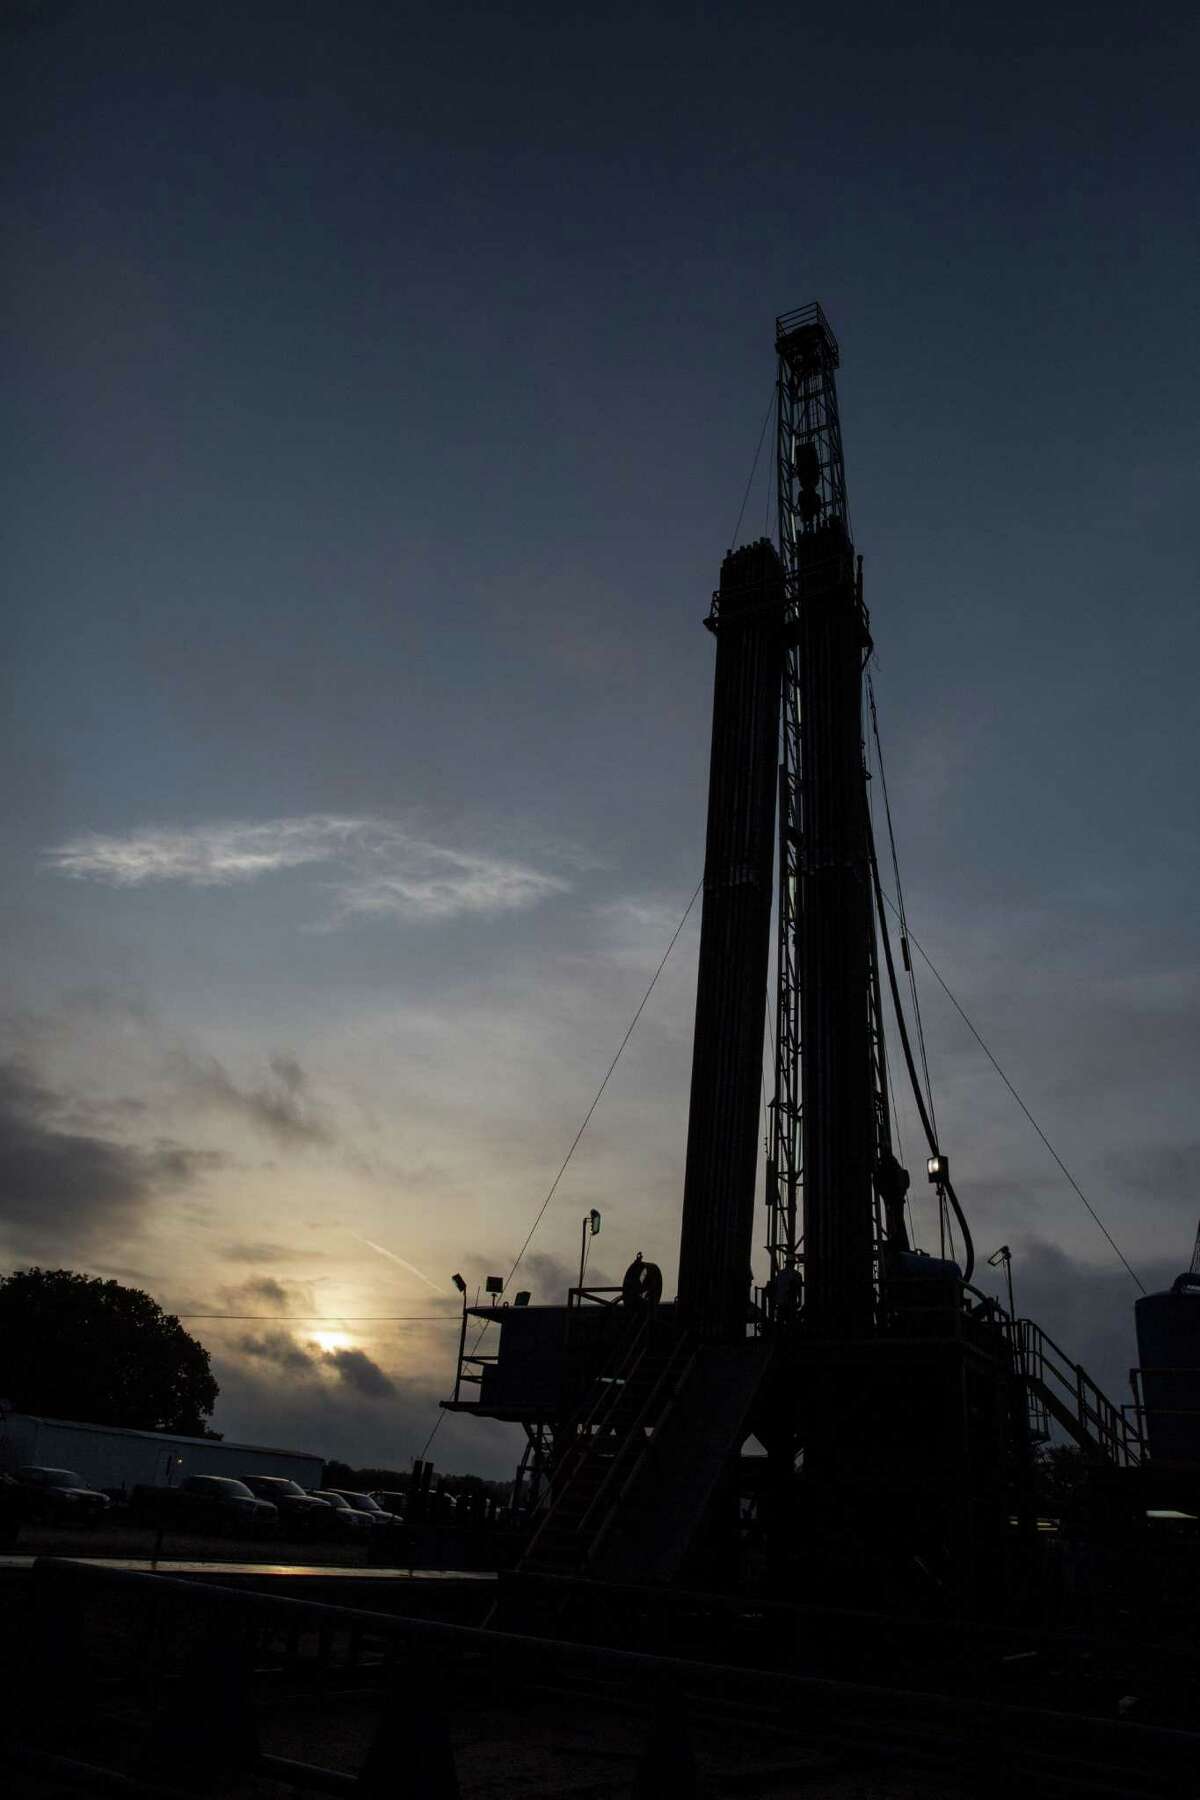 Shale drillers have shown remarkable “tenacity” in holding up output in the face of falling prices, EIA administrator Adam Sieminski said. Crude at $50 to $60 a barrel would probably spur an increase in their production, he said.